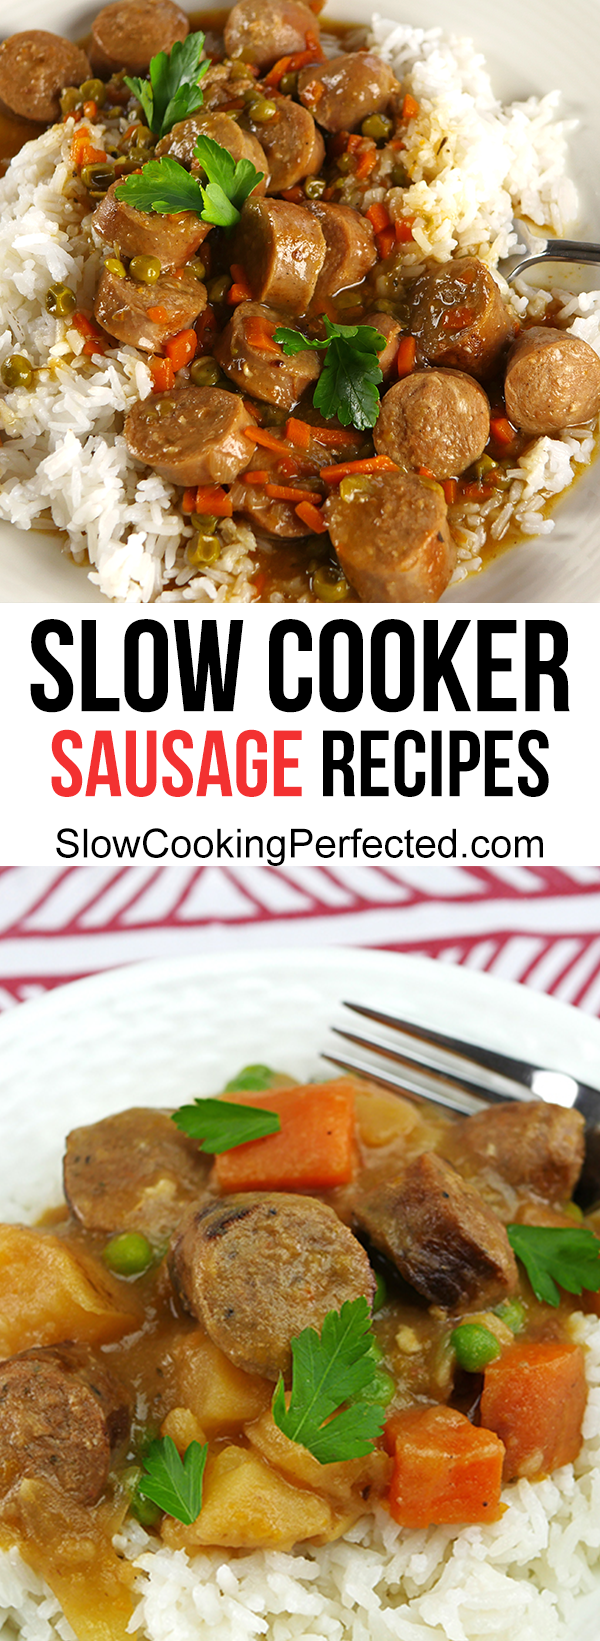 Simply Delicious Slow Cooker Sausage Recipes -   22 sausage recipes slow cooker
 ideas